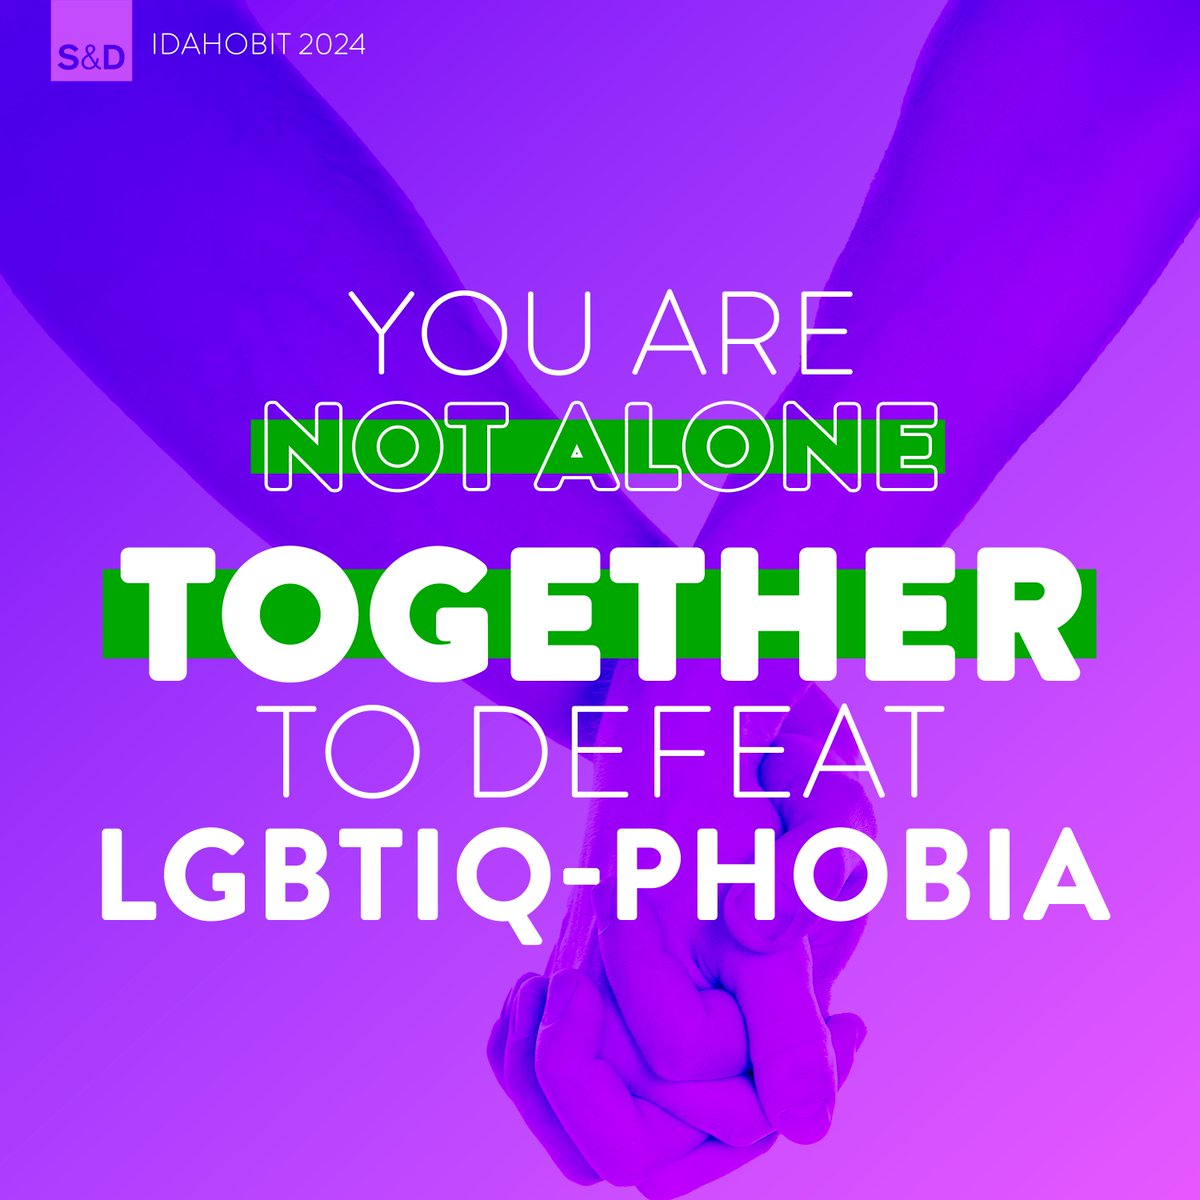 Harassment, violence, and bullying against LGBTIQ people are on the rise in 🇪🇺 On #IDAHOBIT, we reaffirm our commitment to fighting against hate speech and hate crimes, tackling discrimination, and ensuring the rights and health of all LGBTIQ people are protected and respected.